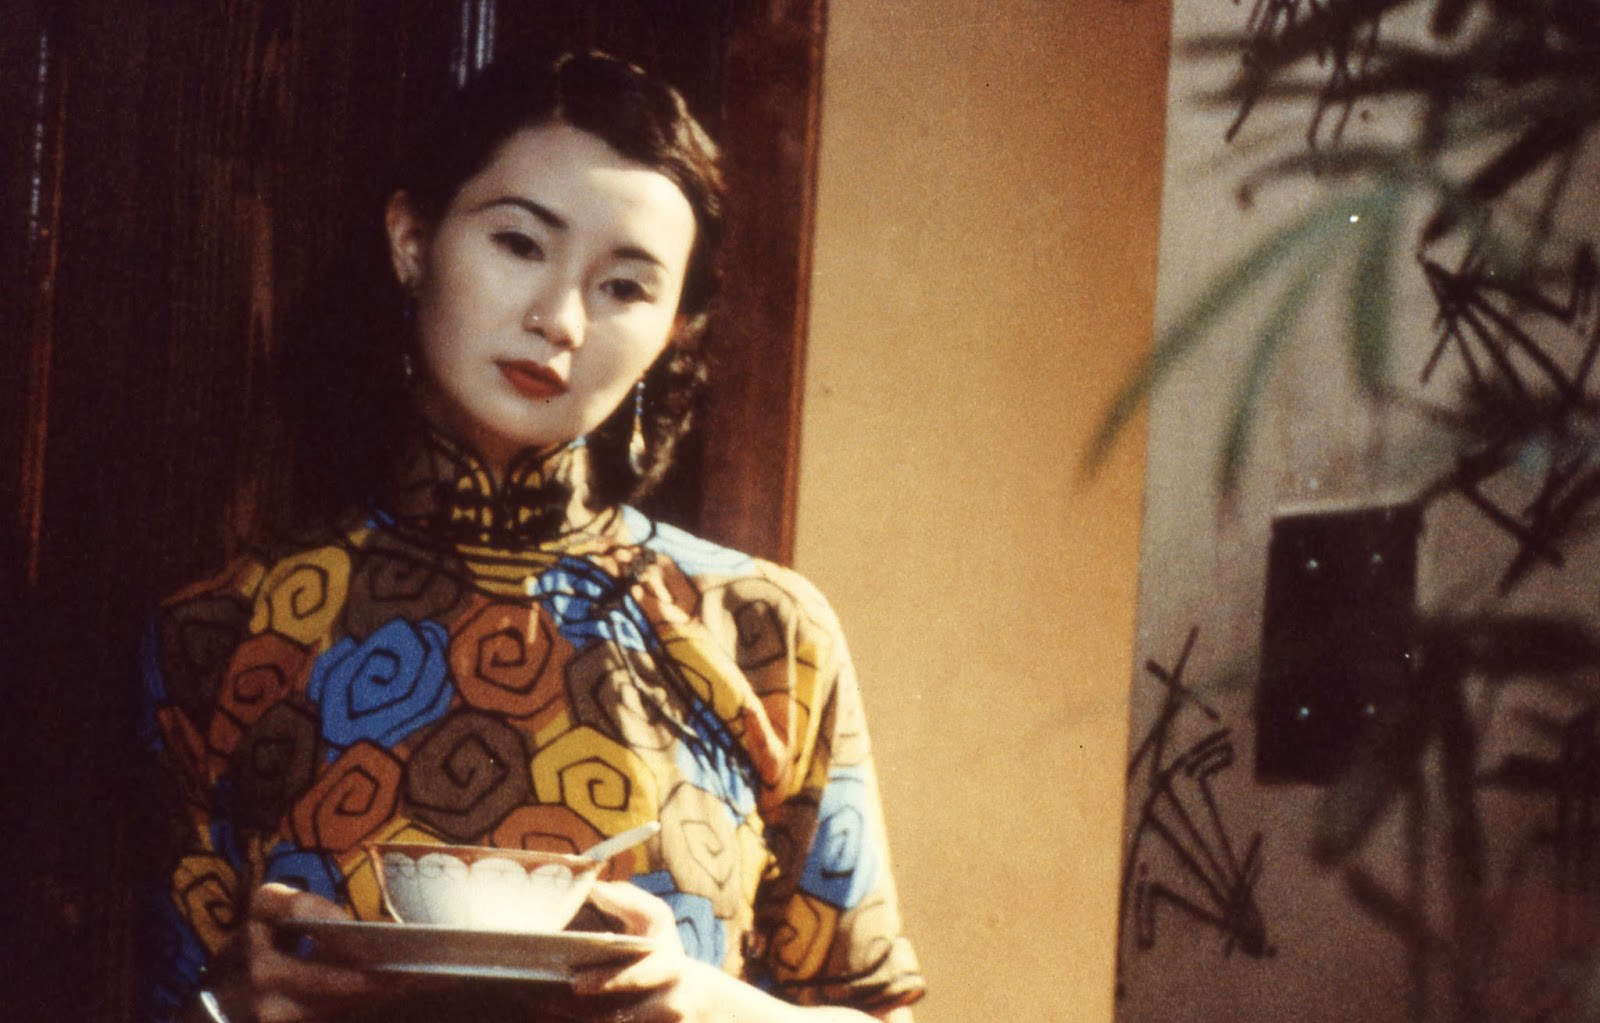 Maggie Cheung in a still from Center Stage. Photo: Golden Way Films